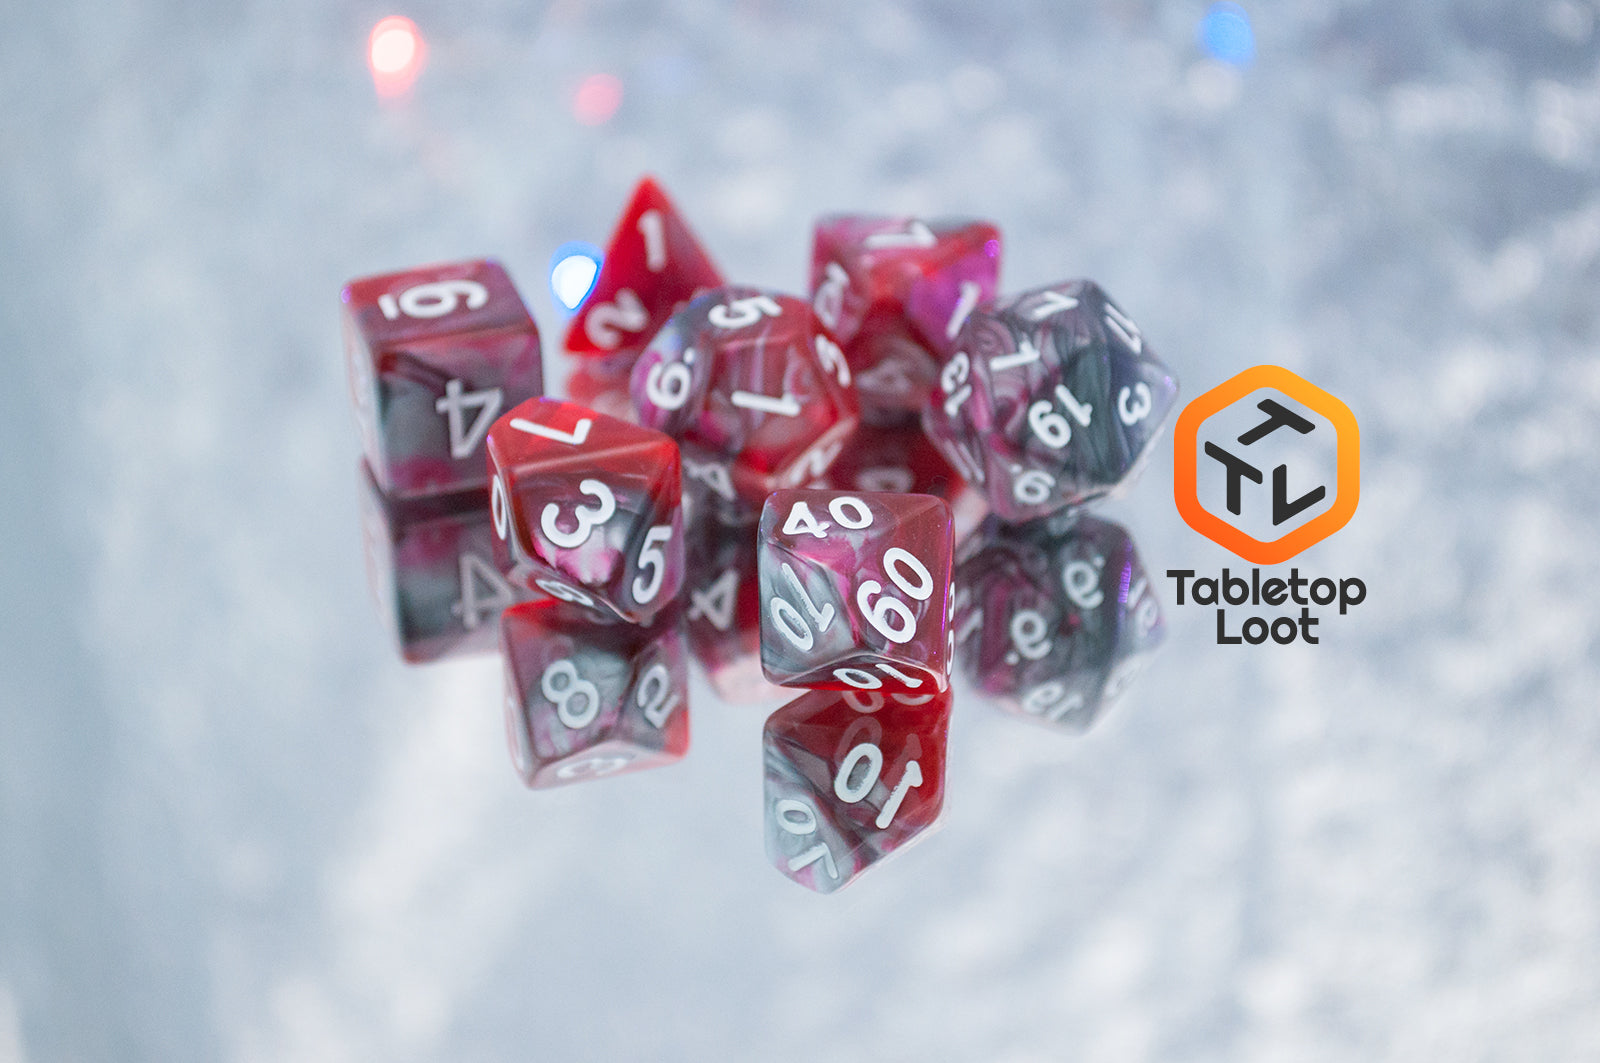 The Dragon's Blood 7 piece dice set from Tabletop Loot with swirled red and grey resin and white numbering.